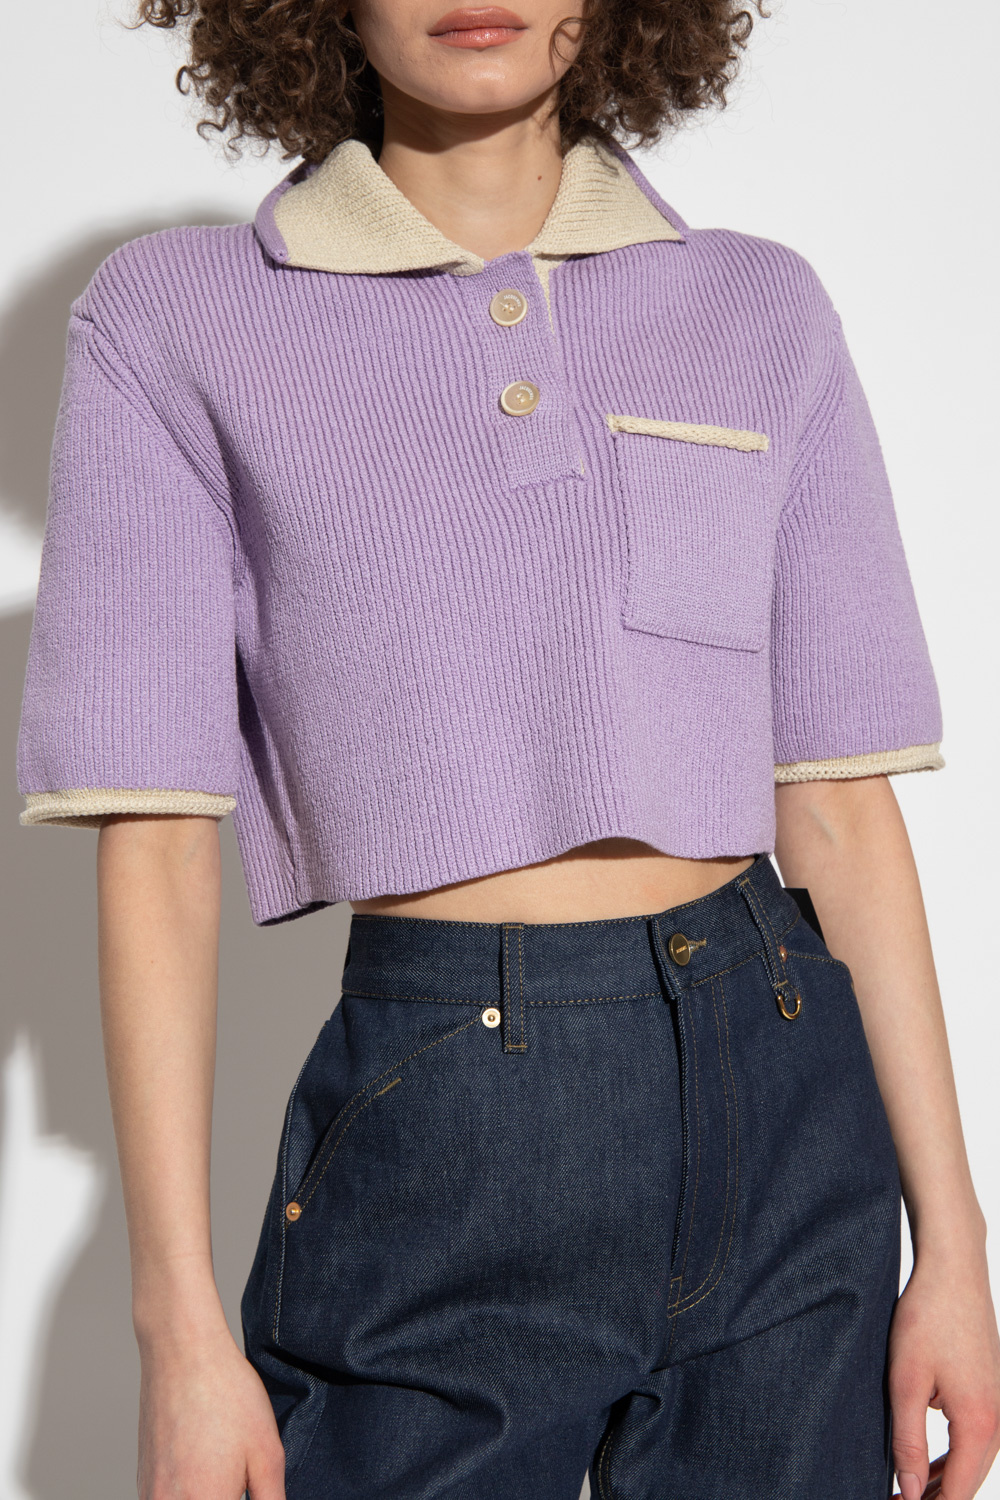 Jacquemus ‘Arco’ cropped Windrunner sweater